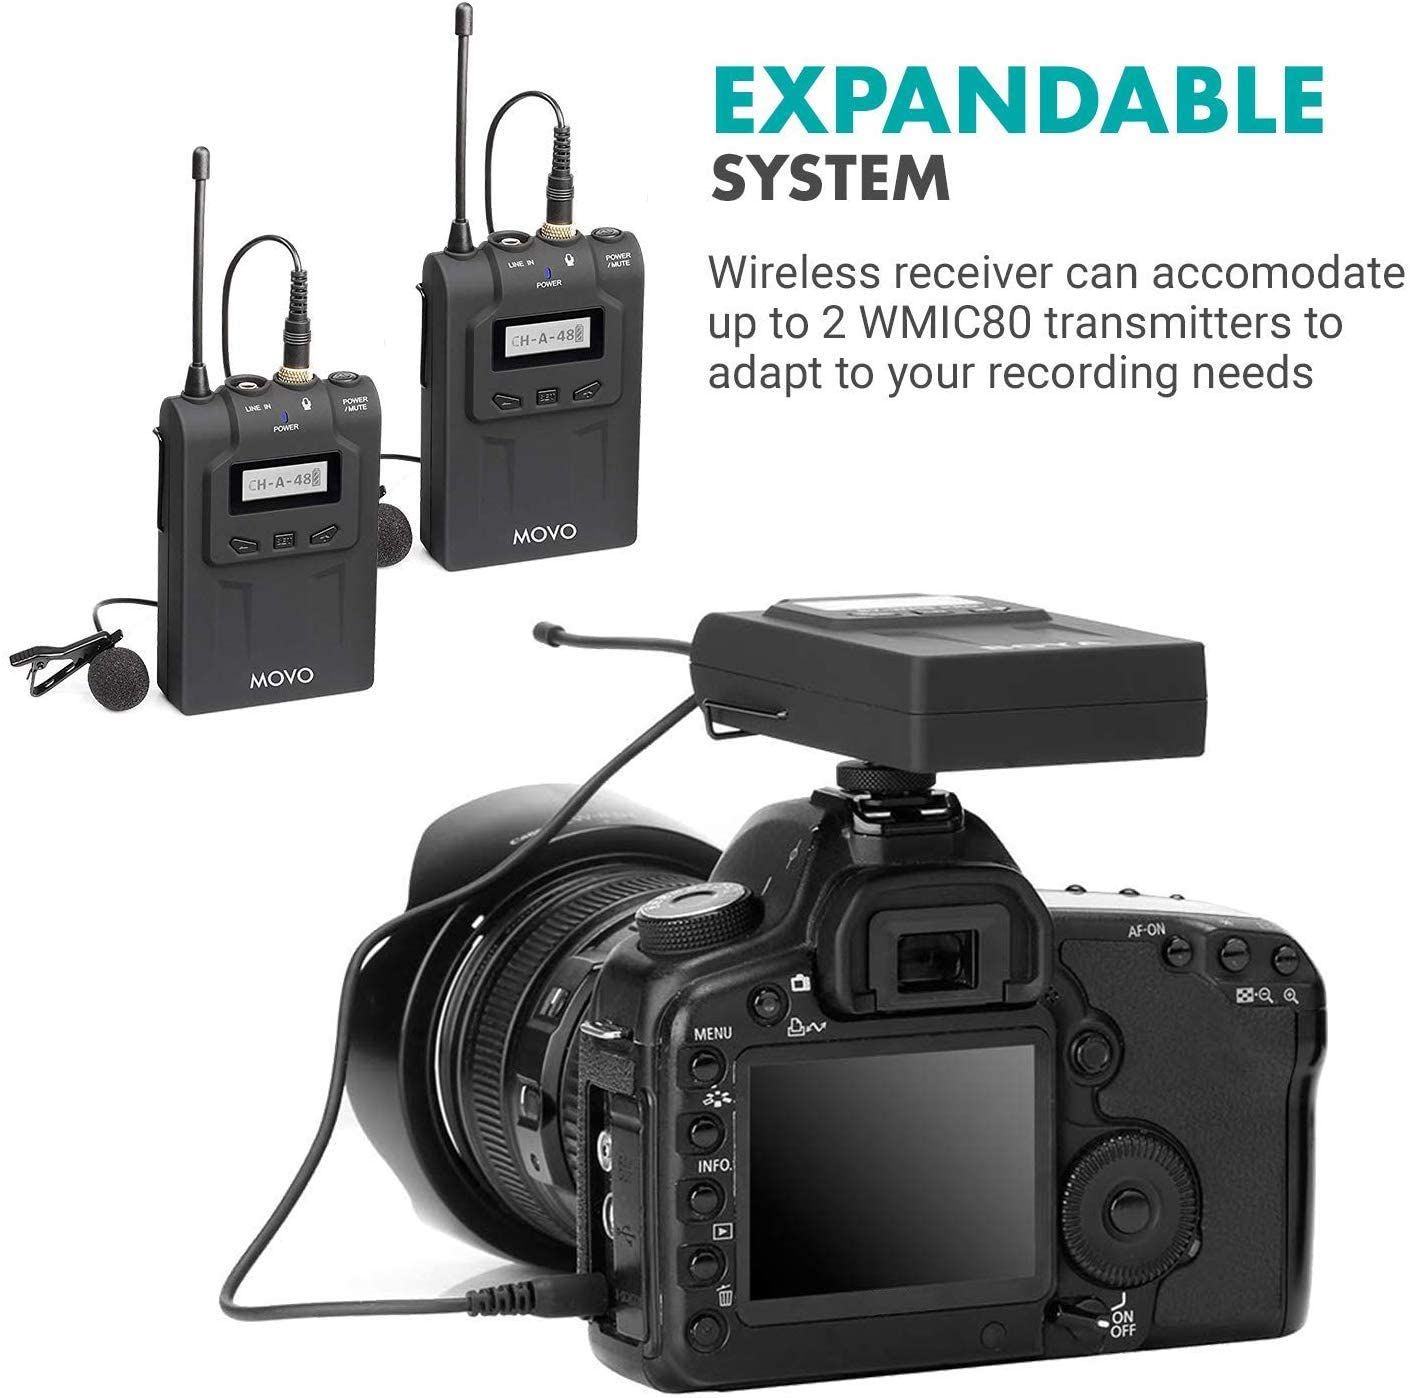 Movo WMIC80 expandable system